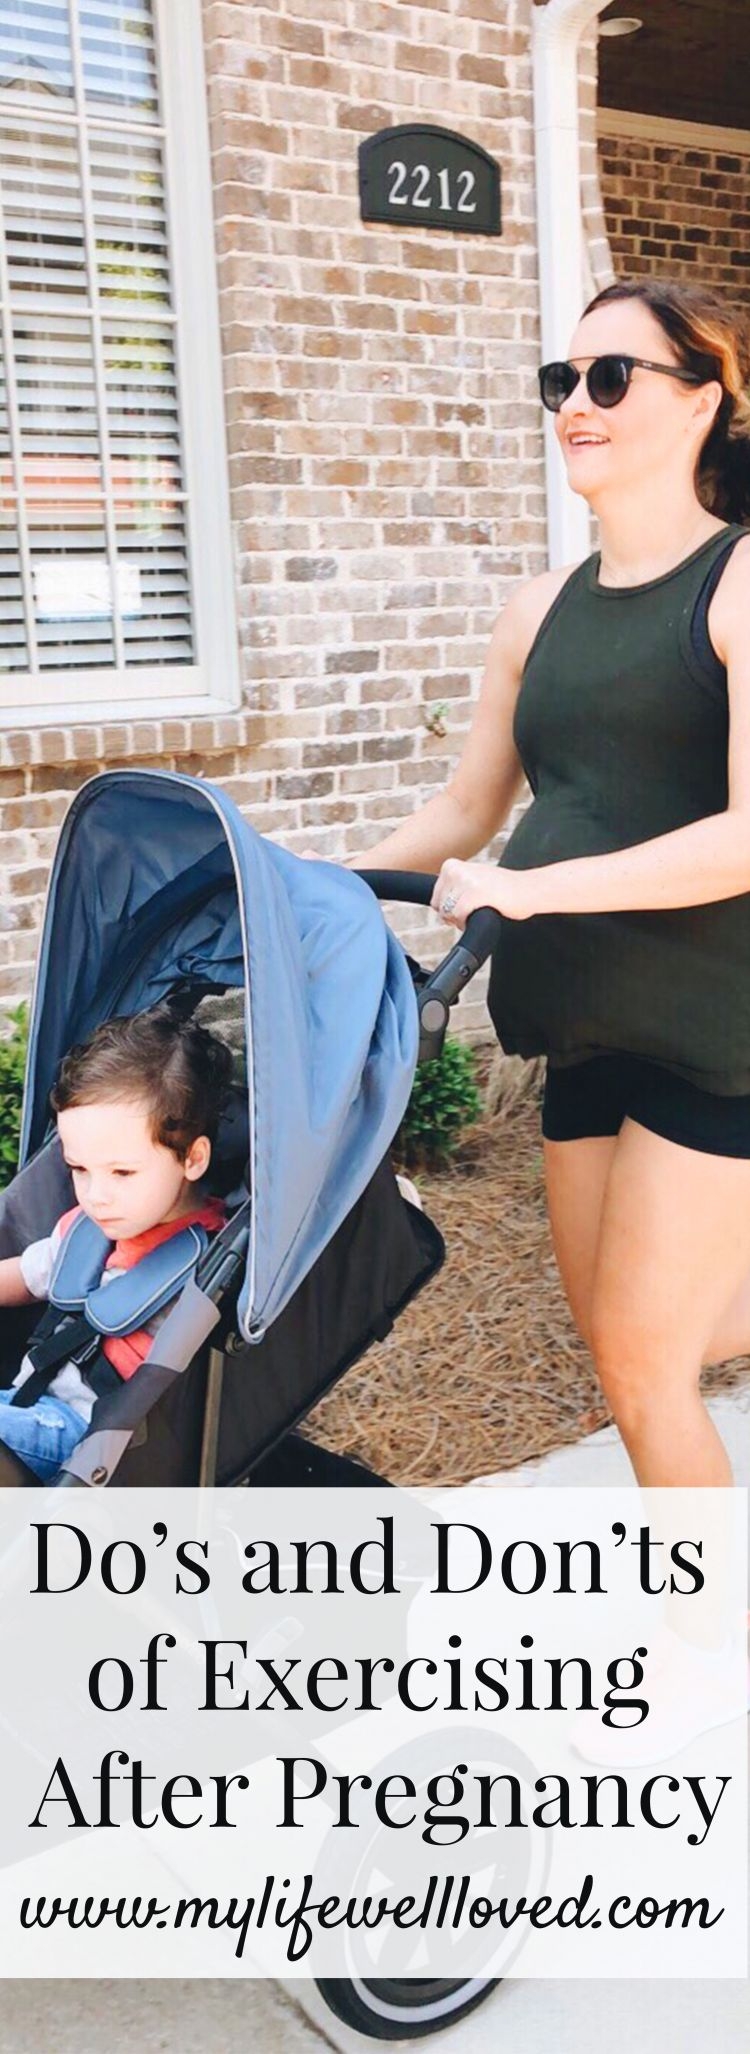 Popular Alabama fitness blogger shares her experience with returning to a post pregnancy workout routine including do's and don'ts to exercising postpartum // #postpartumworkout #bodyafterbaby #momlife #fitness